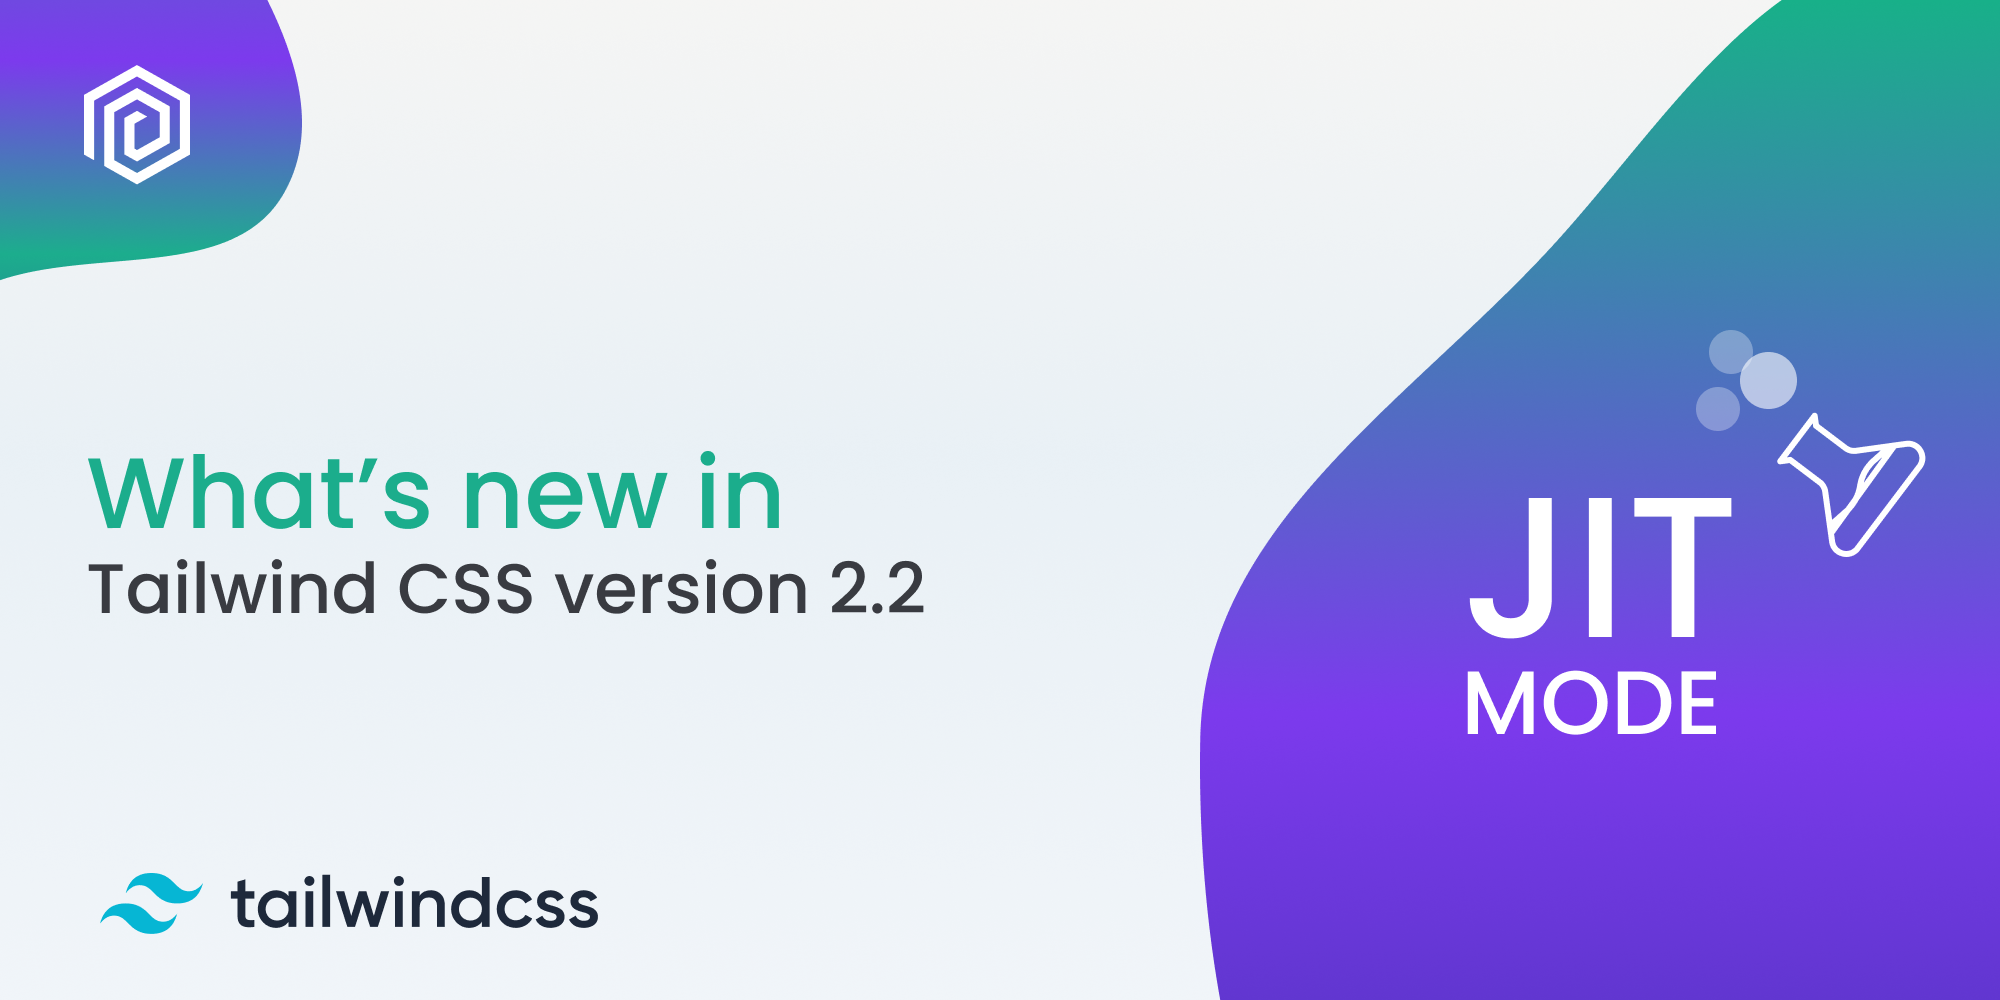 What is new in Tailwind CSS version 2.2